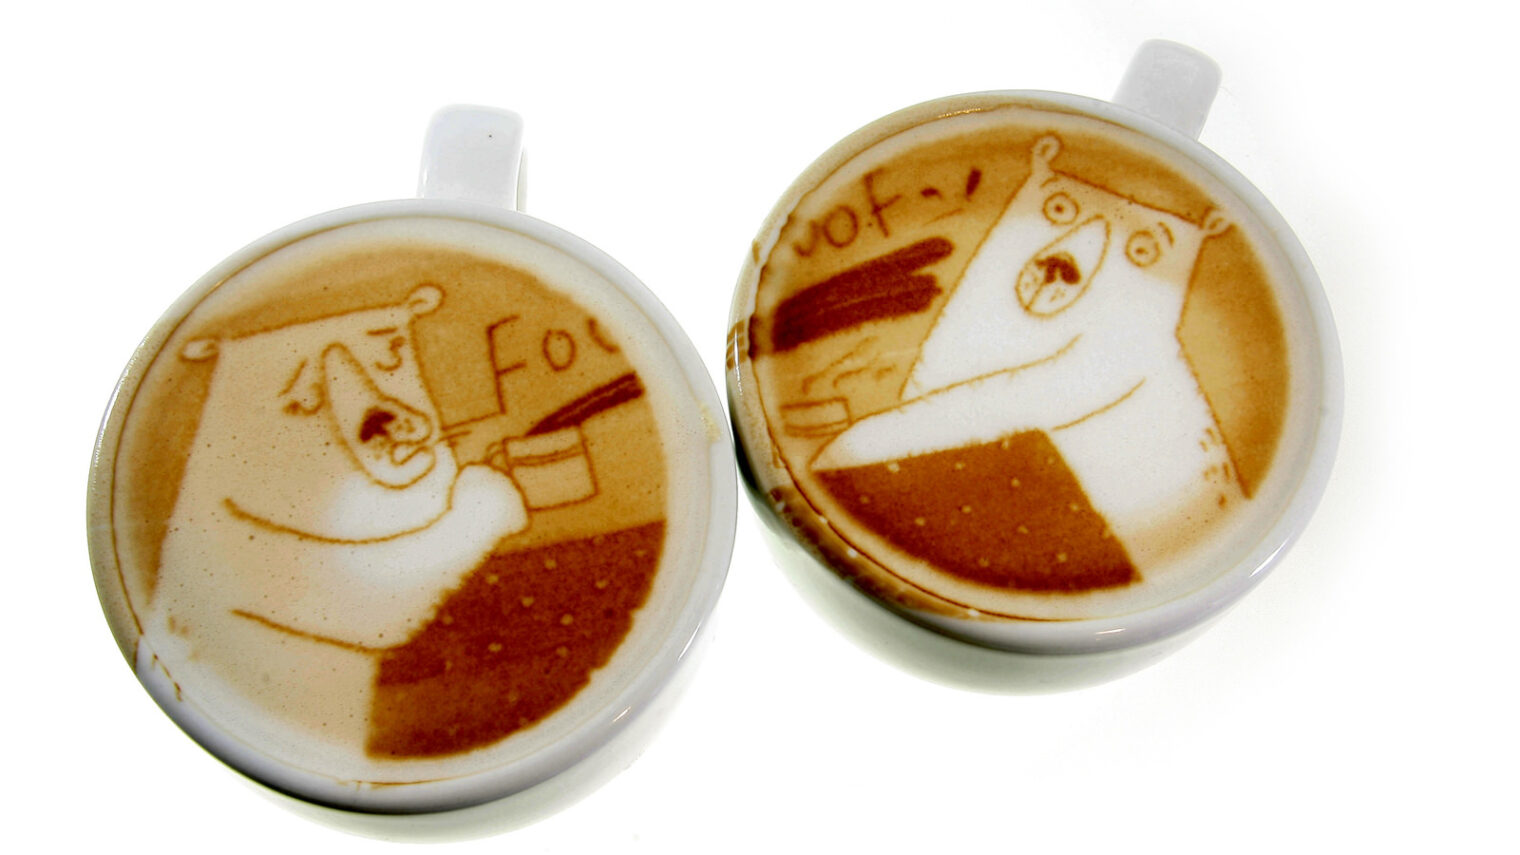 Ripples has started a coffee-art trend. Photo: courtesy